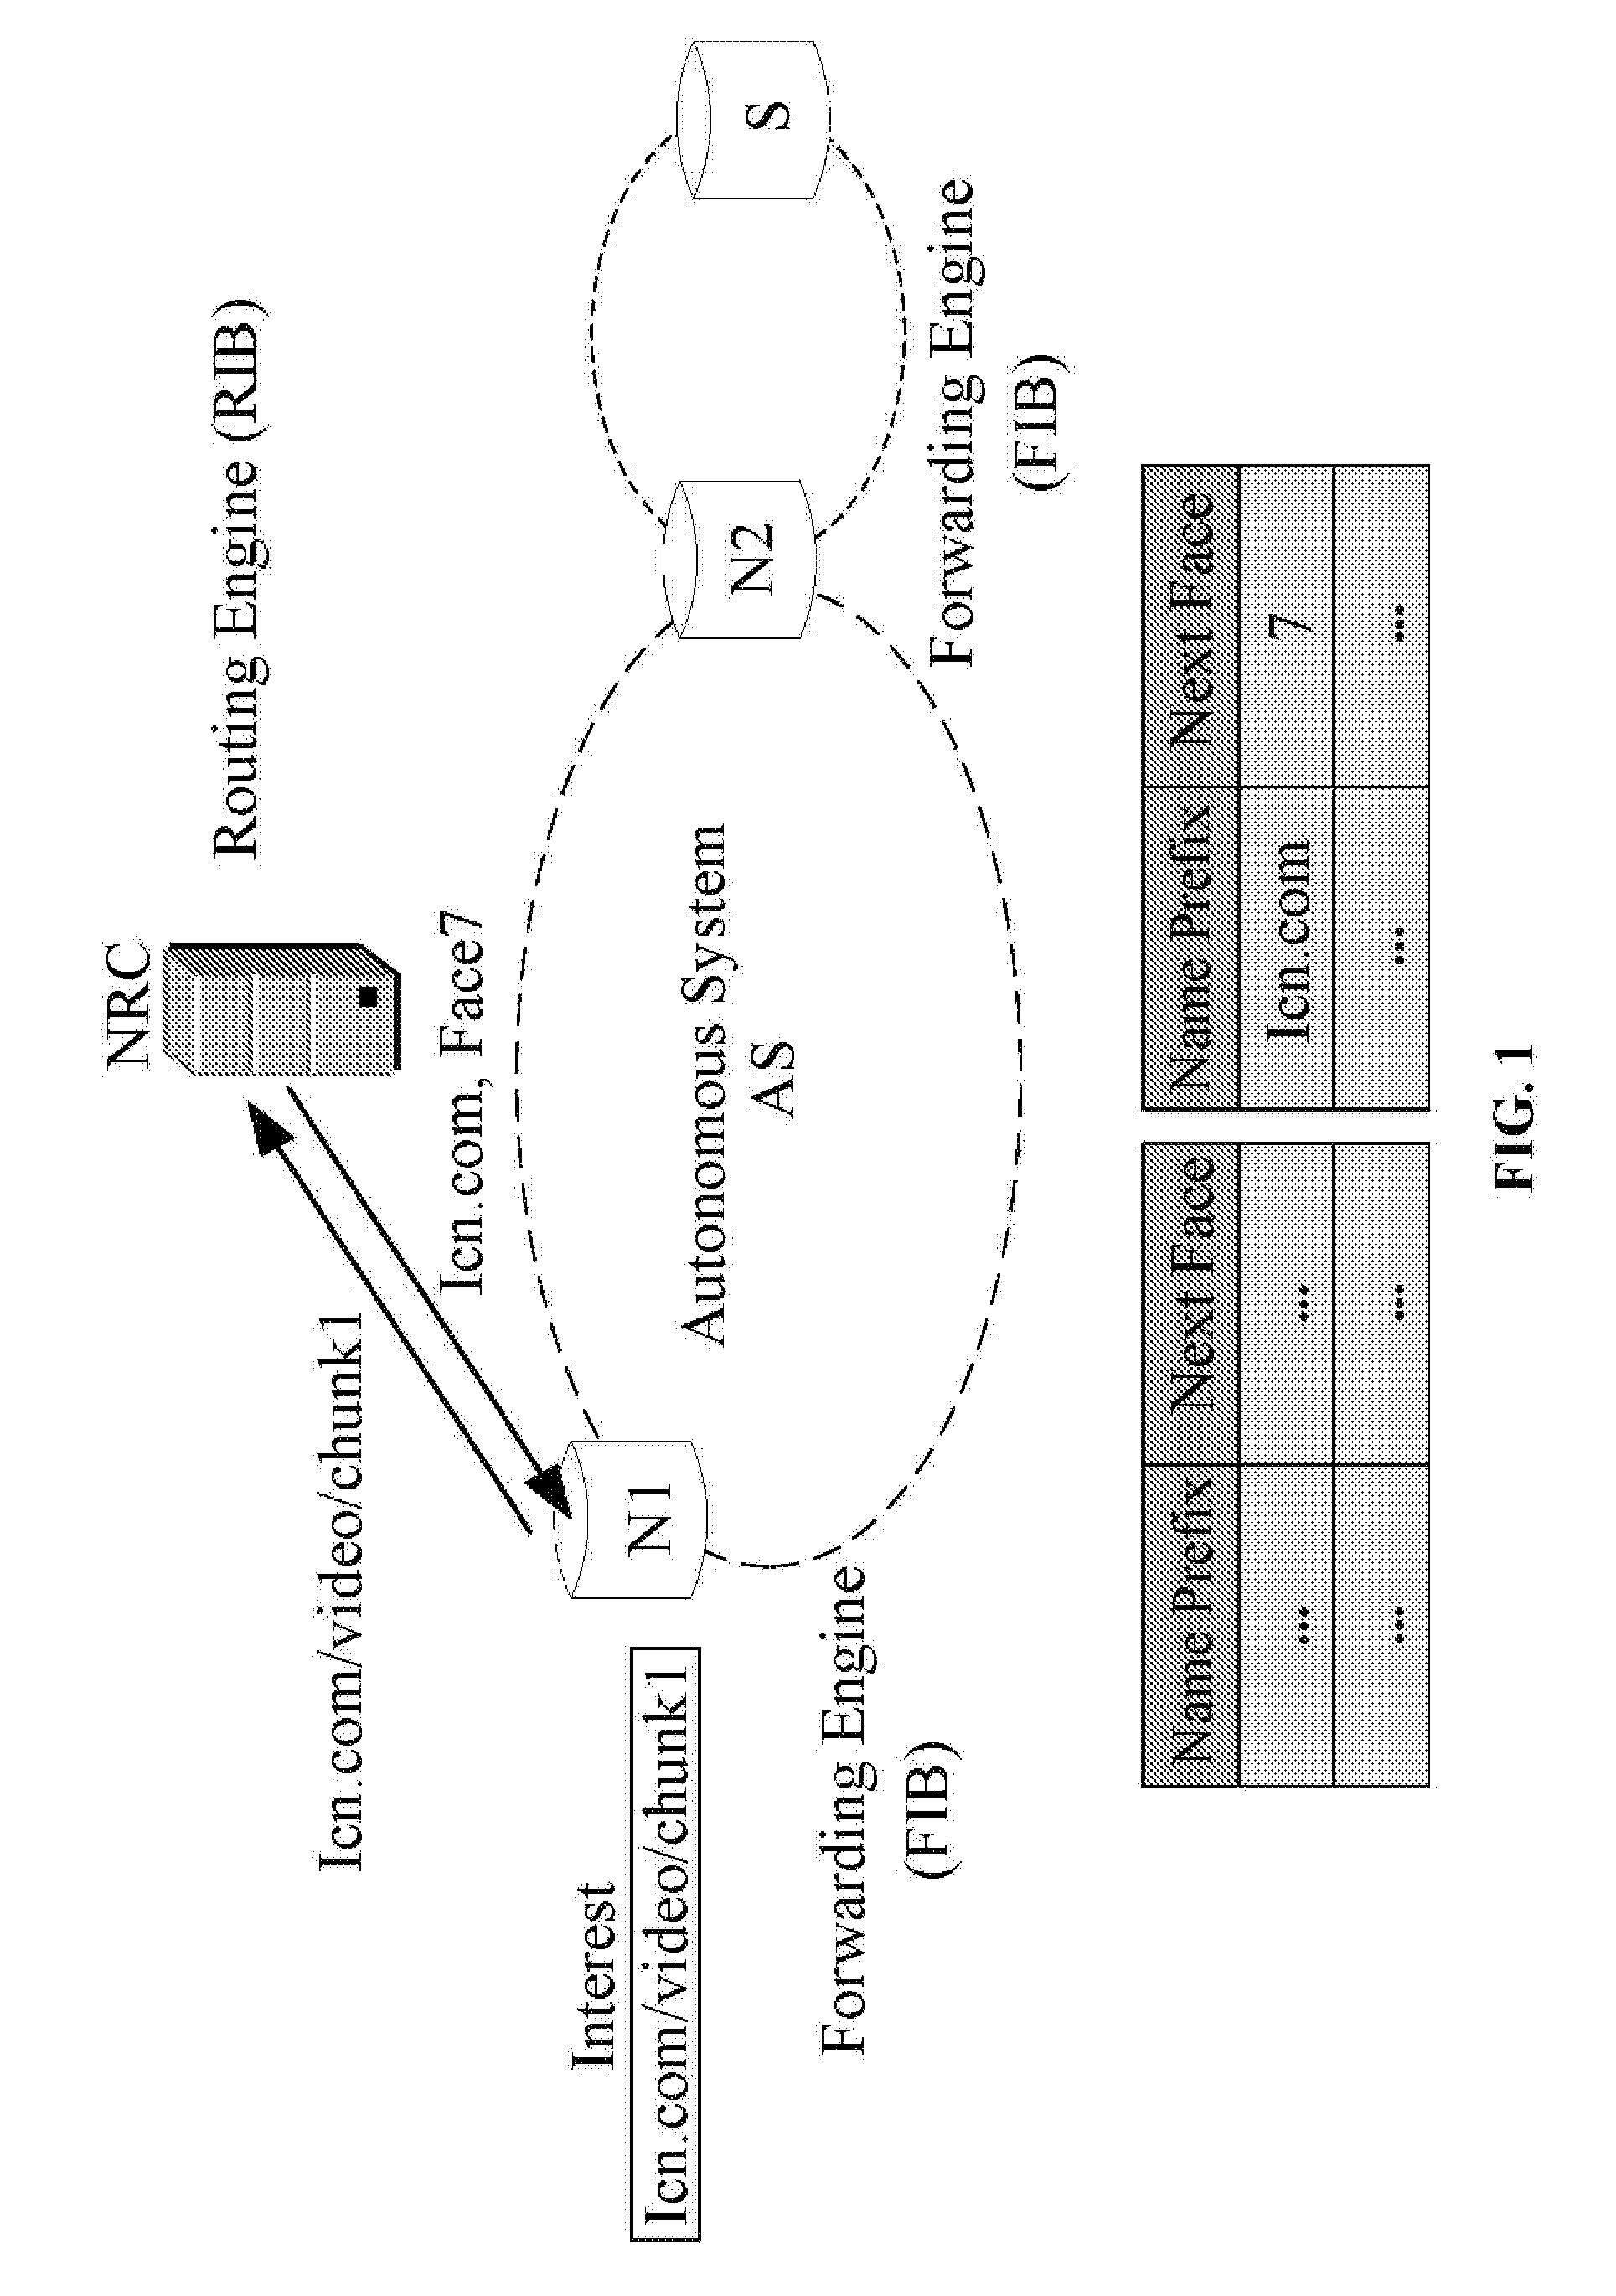 Content-based routing method and system